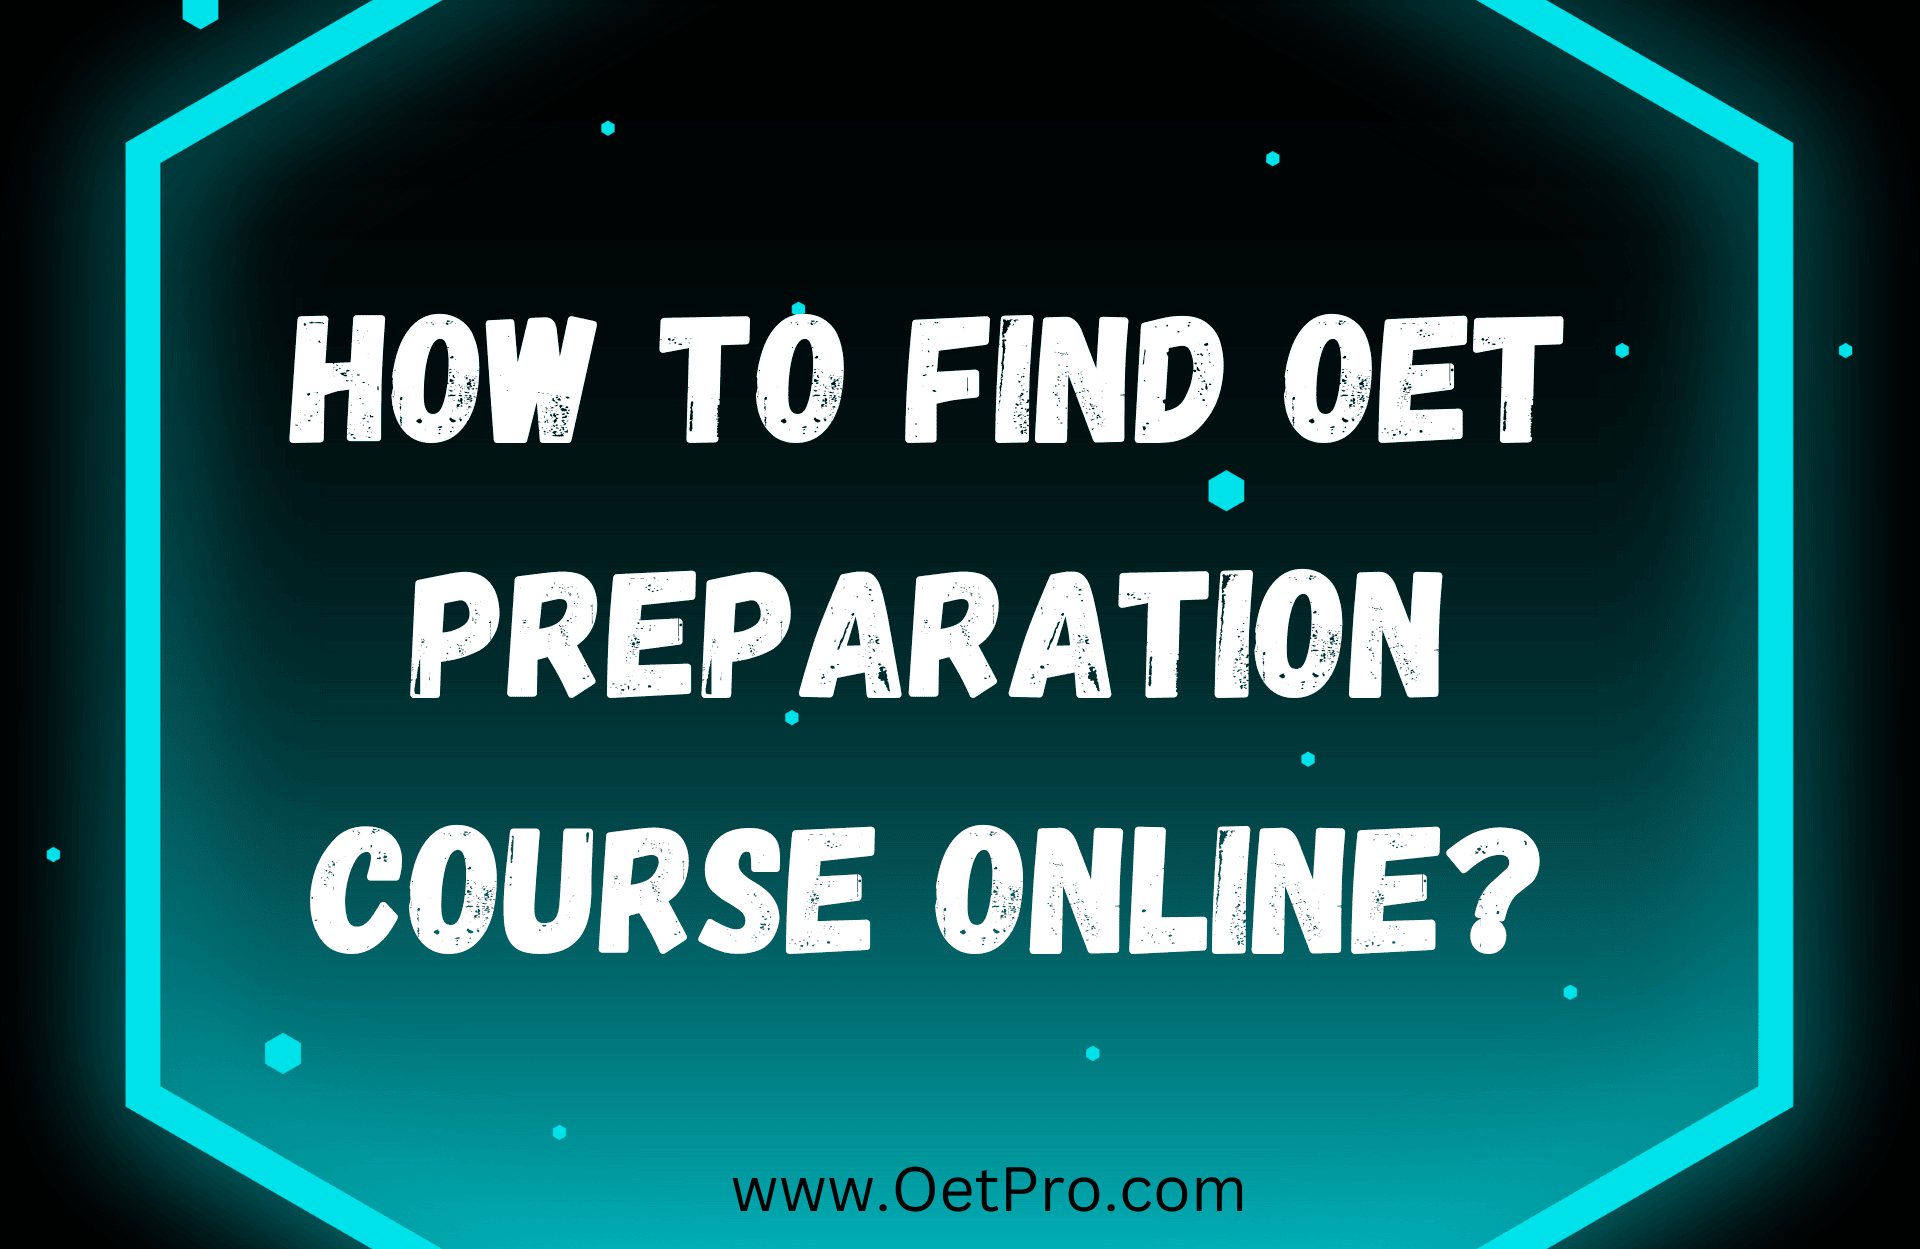 How to Find OET Preparation Course Online?